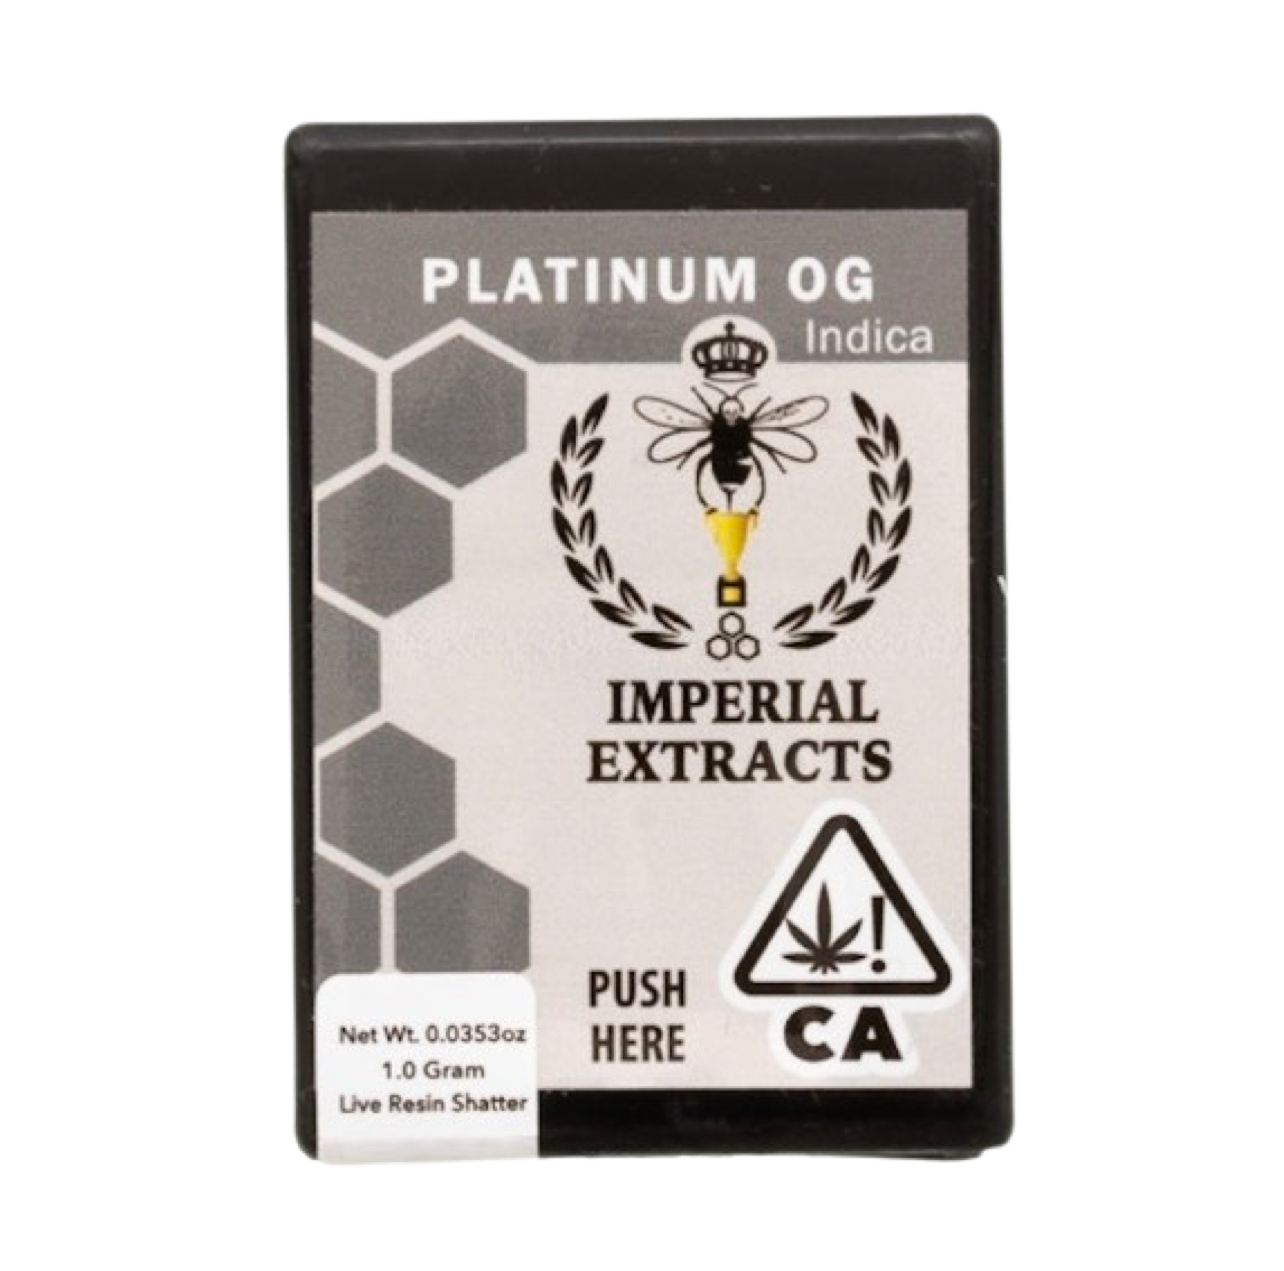 1 Gram Live Resin Shatter by Imperial Extracts | Platinum Og| Indica